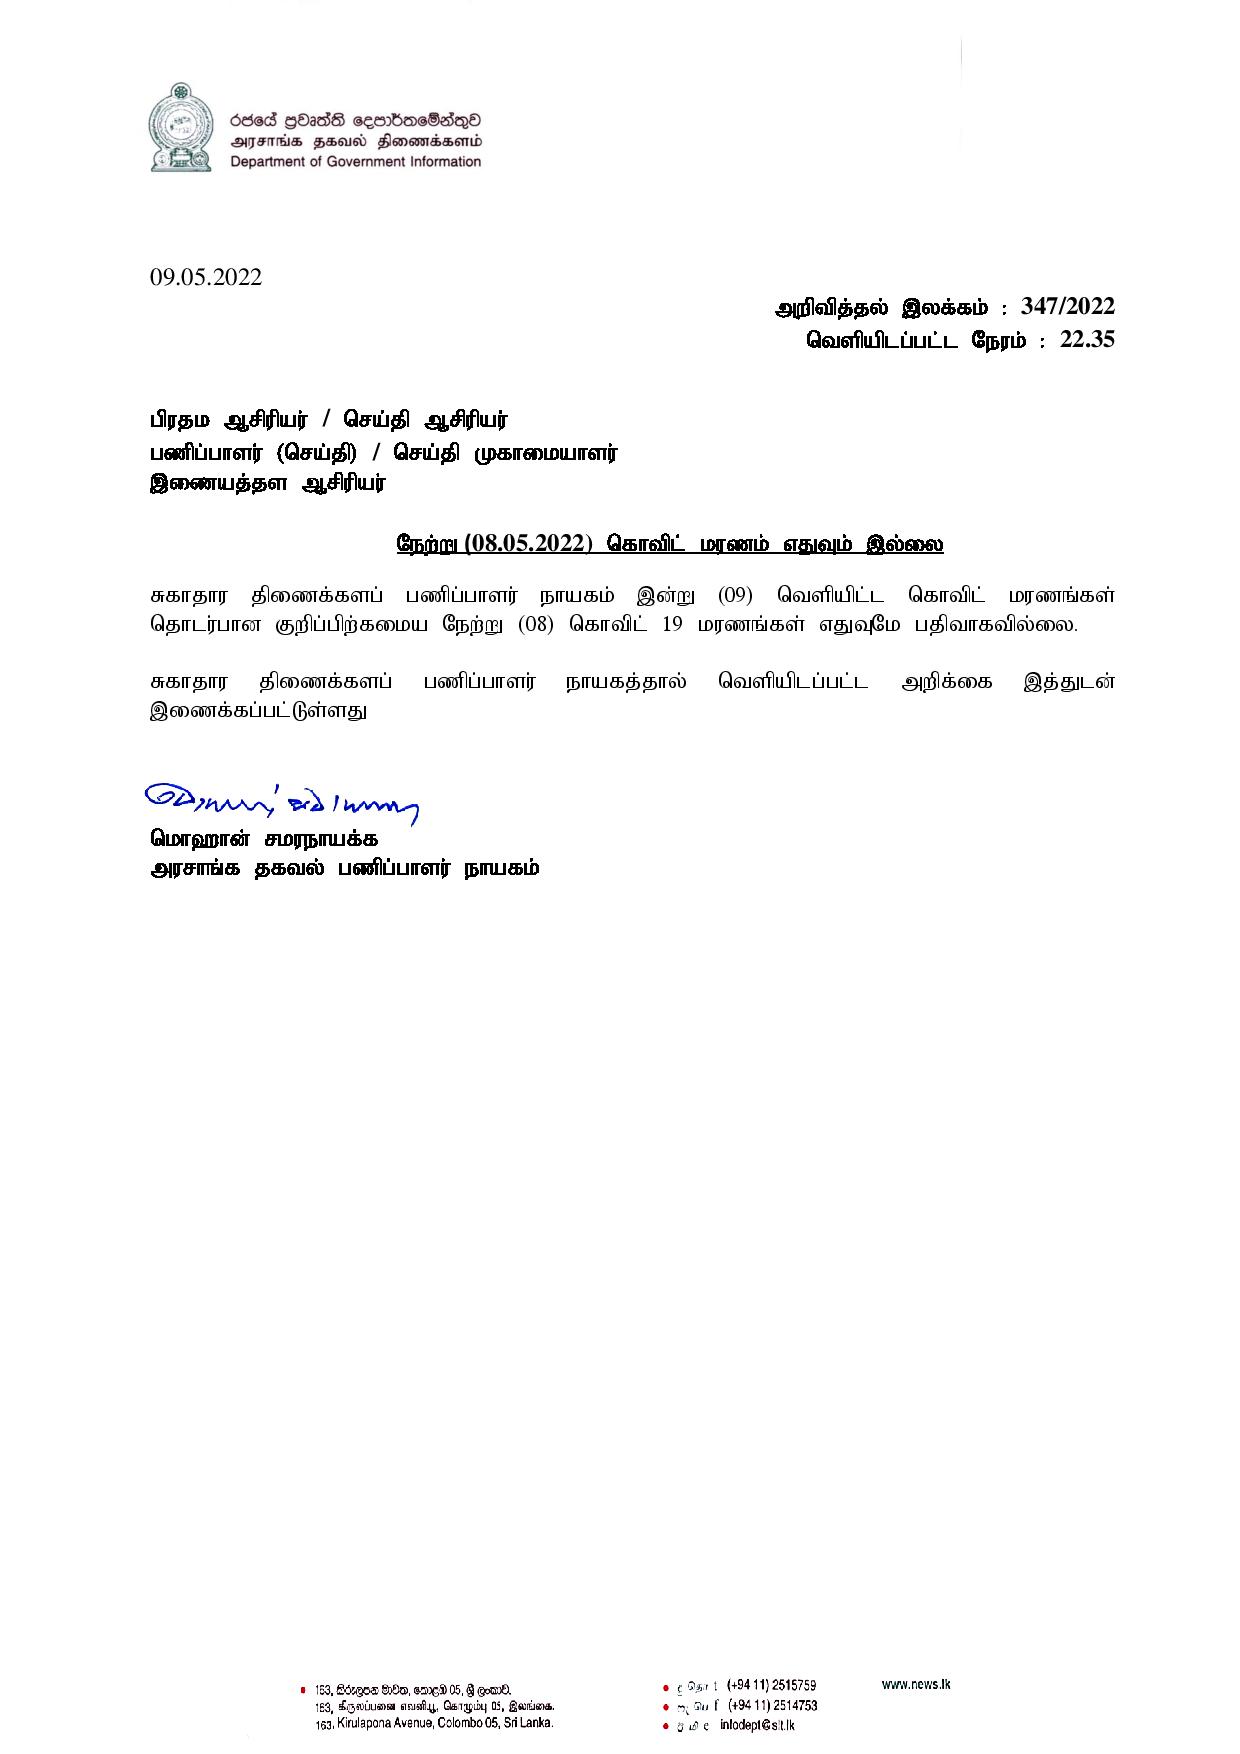 Press Release 347 Tamil page 001